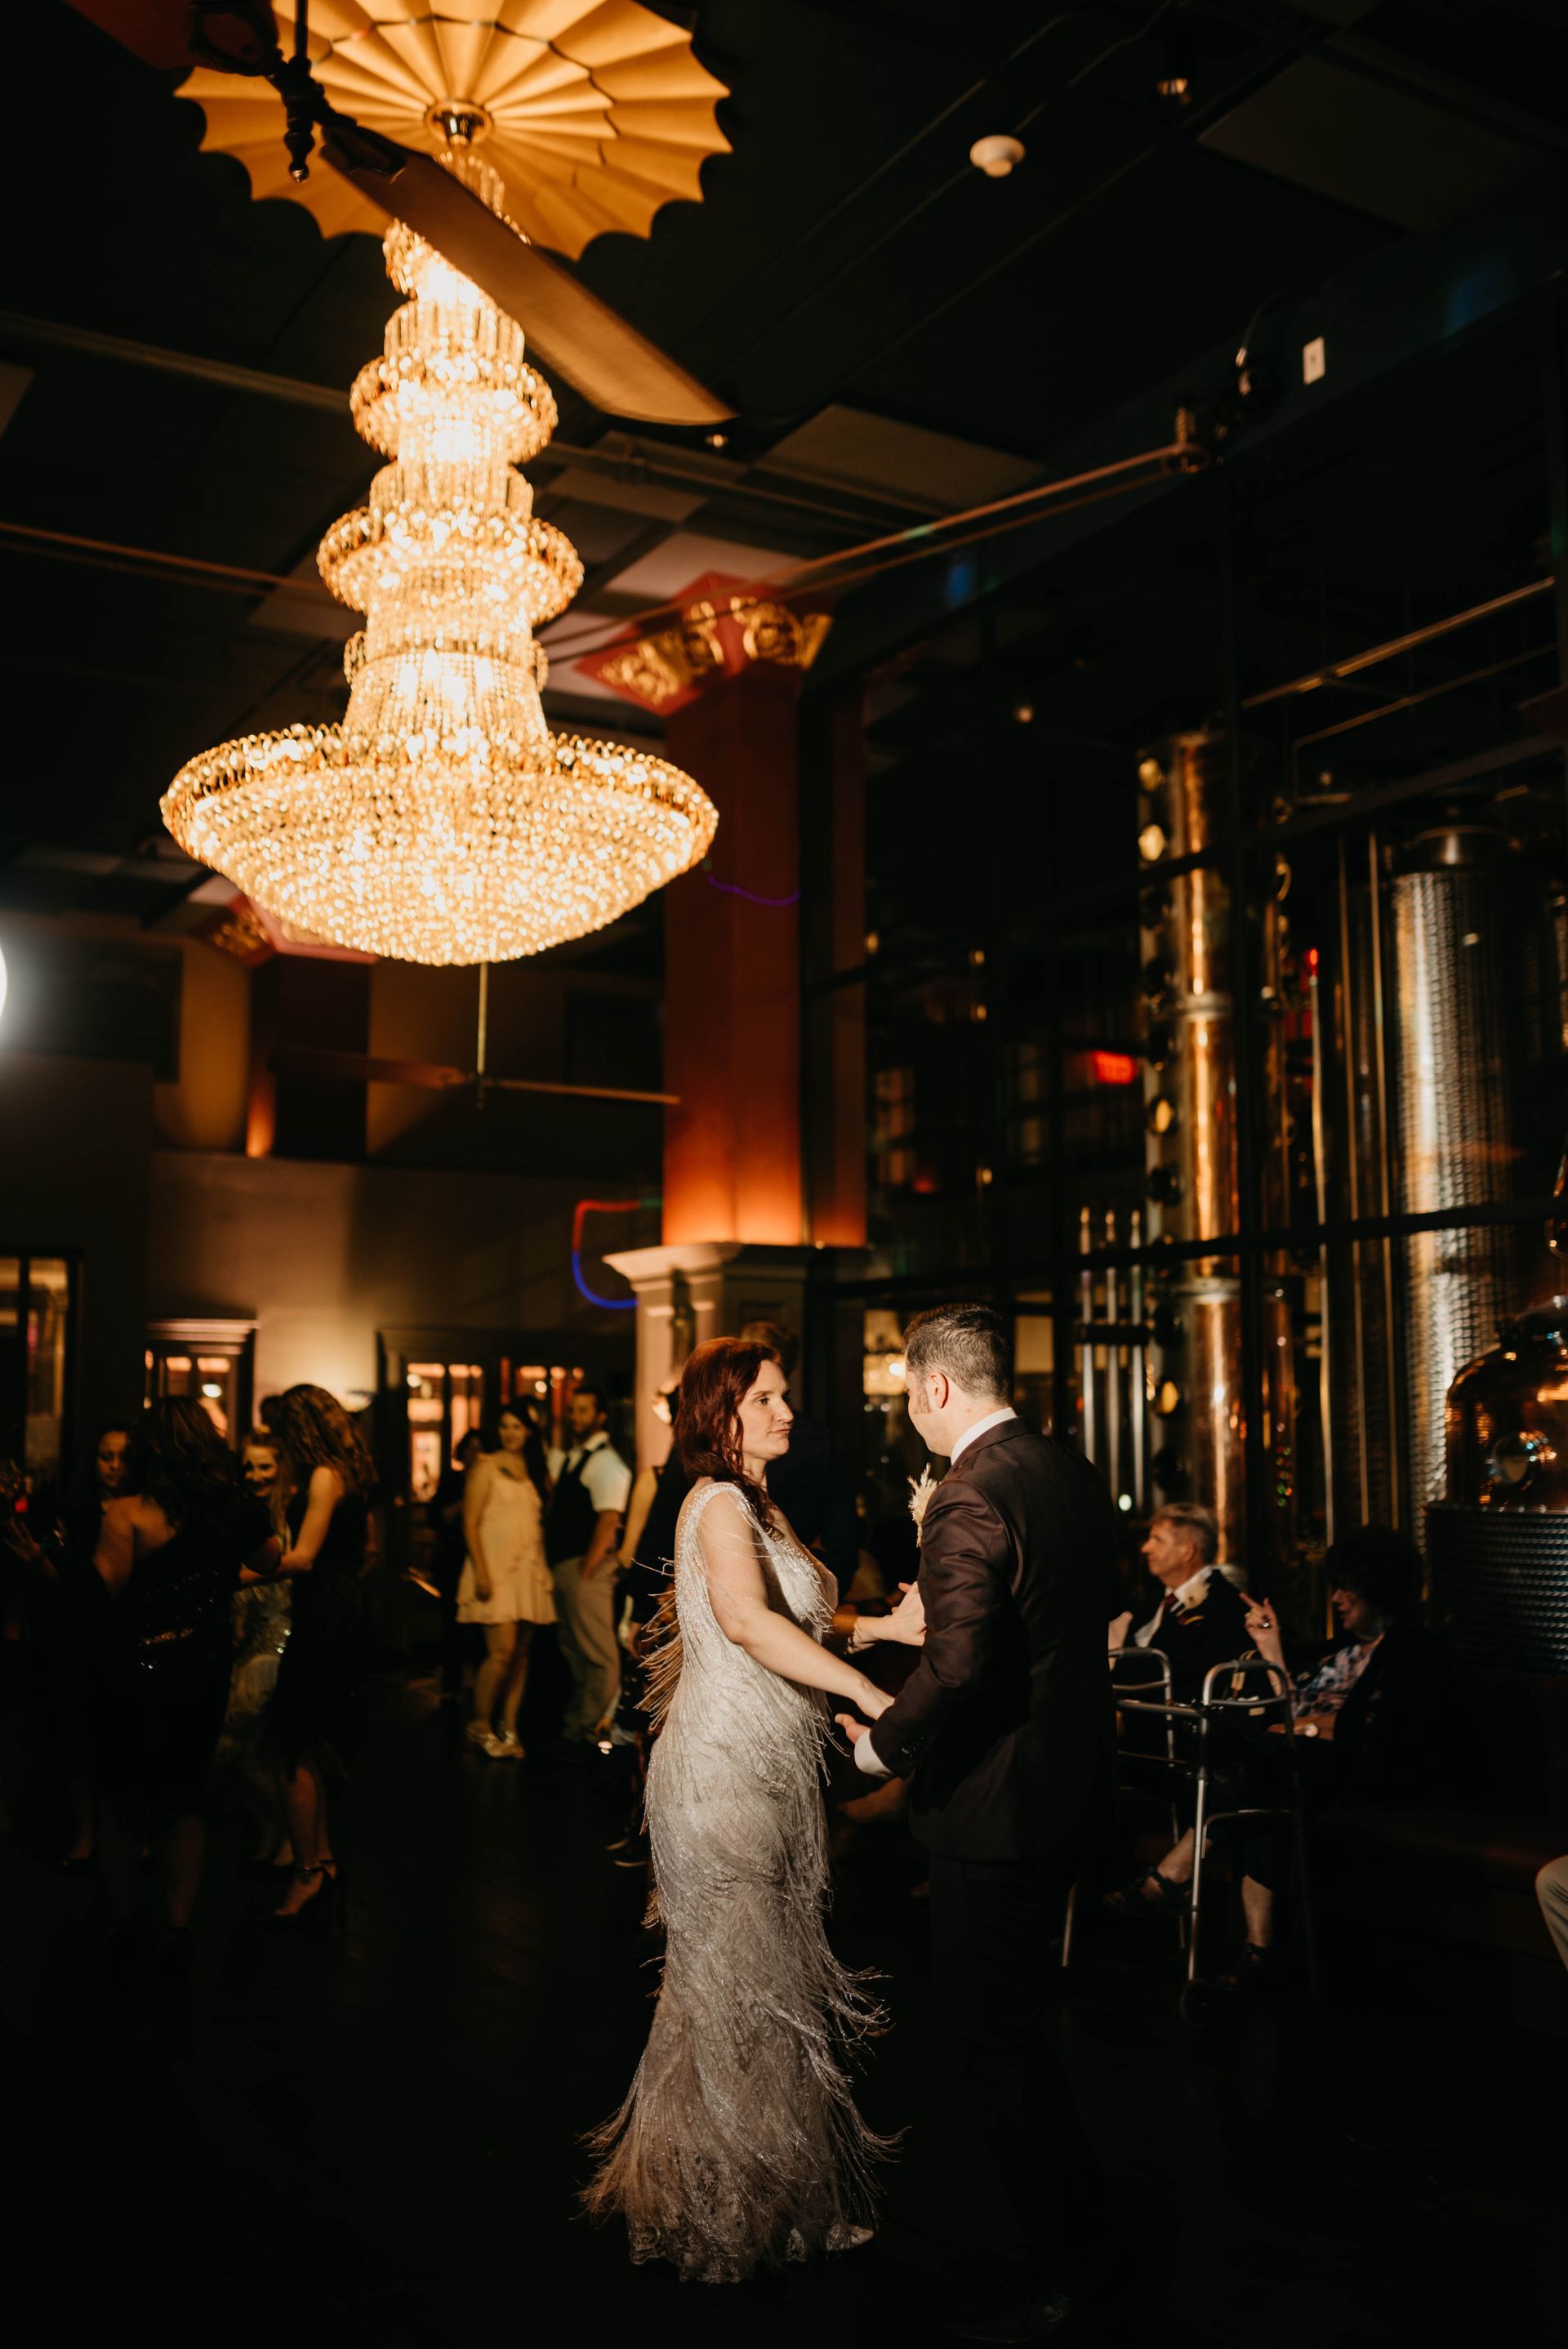 a bride and groom are dancing under a large chandelier